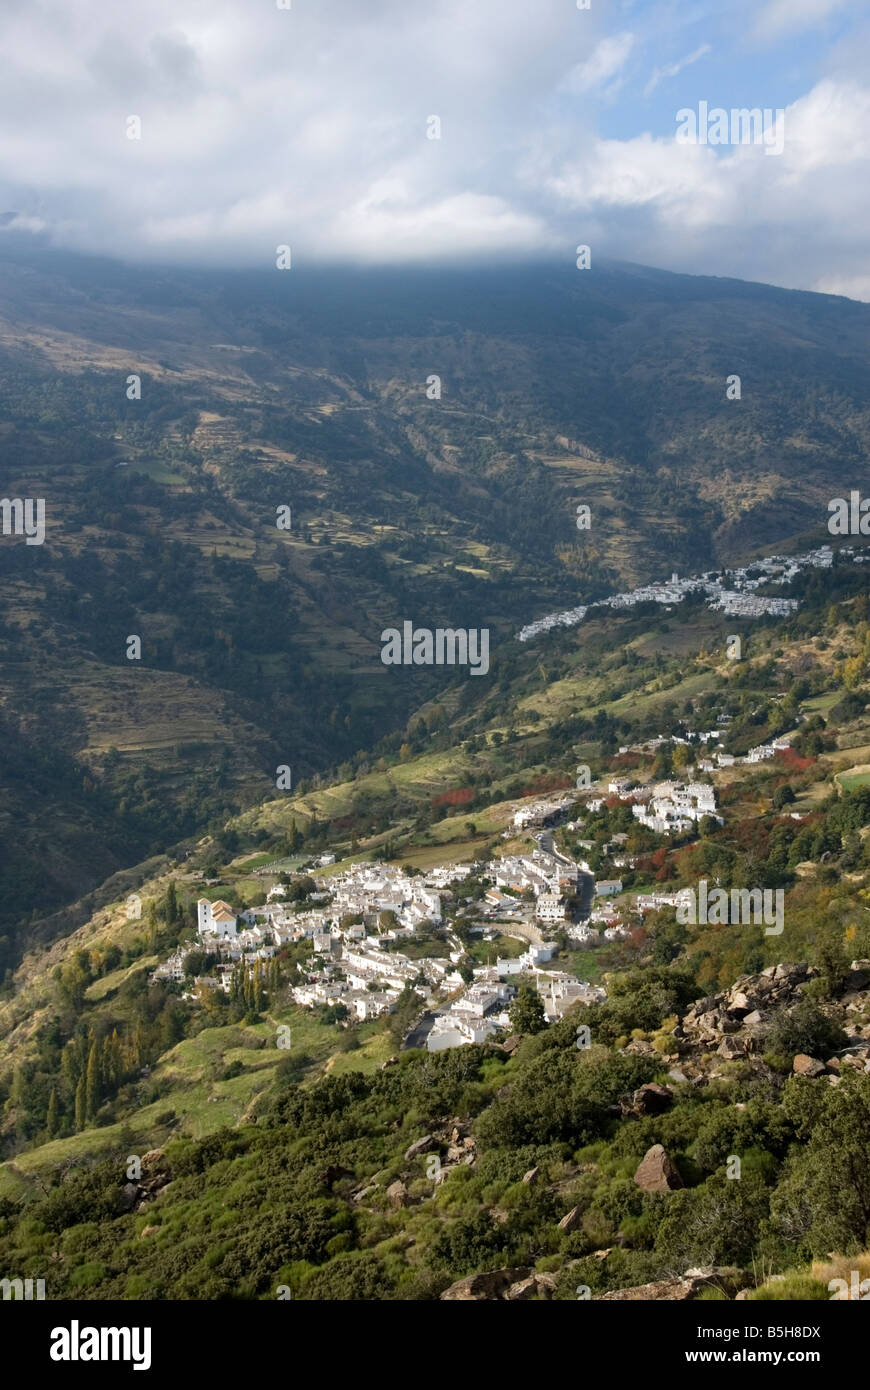 Whitewashed Andalusian villages of Bubion bottom and Capileira in the Sierra Nevada mountain range Alpujarra Spain Stock Photo